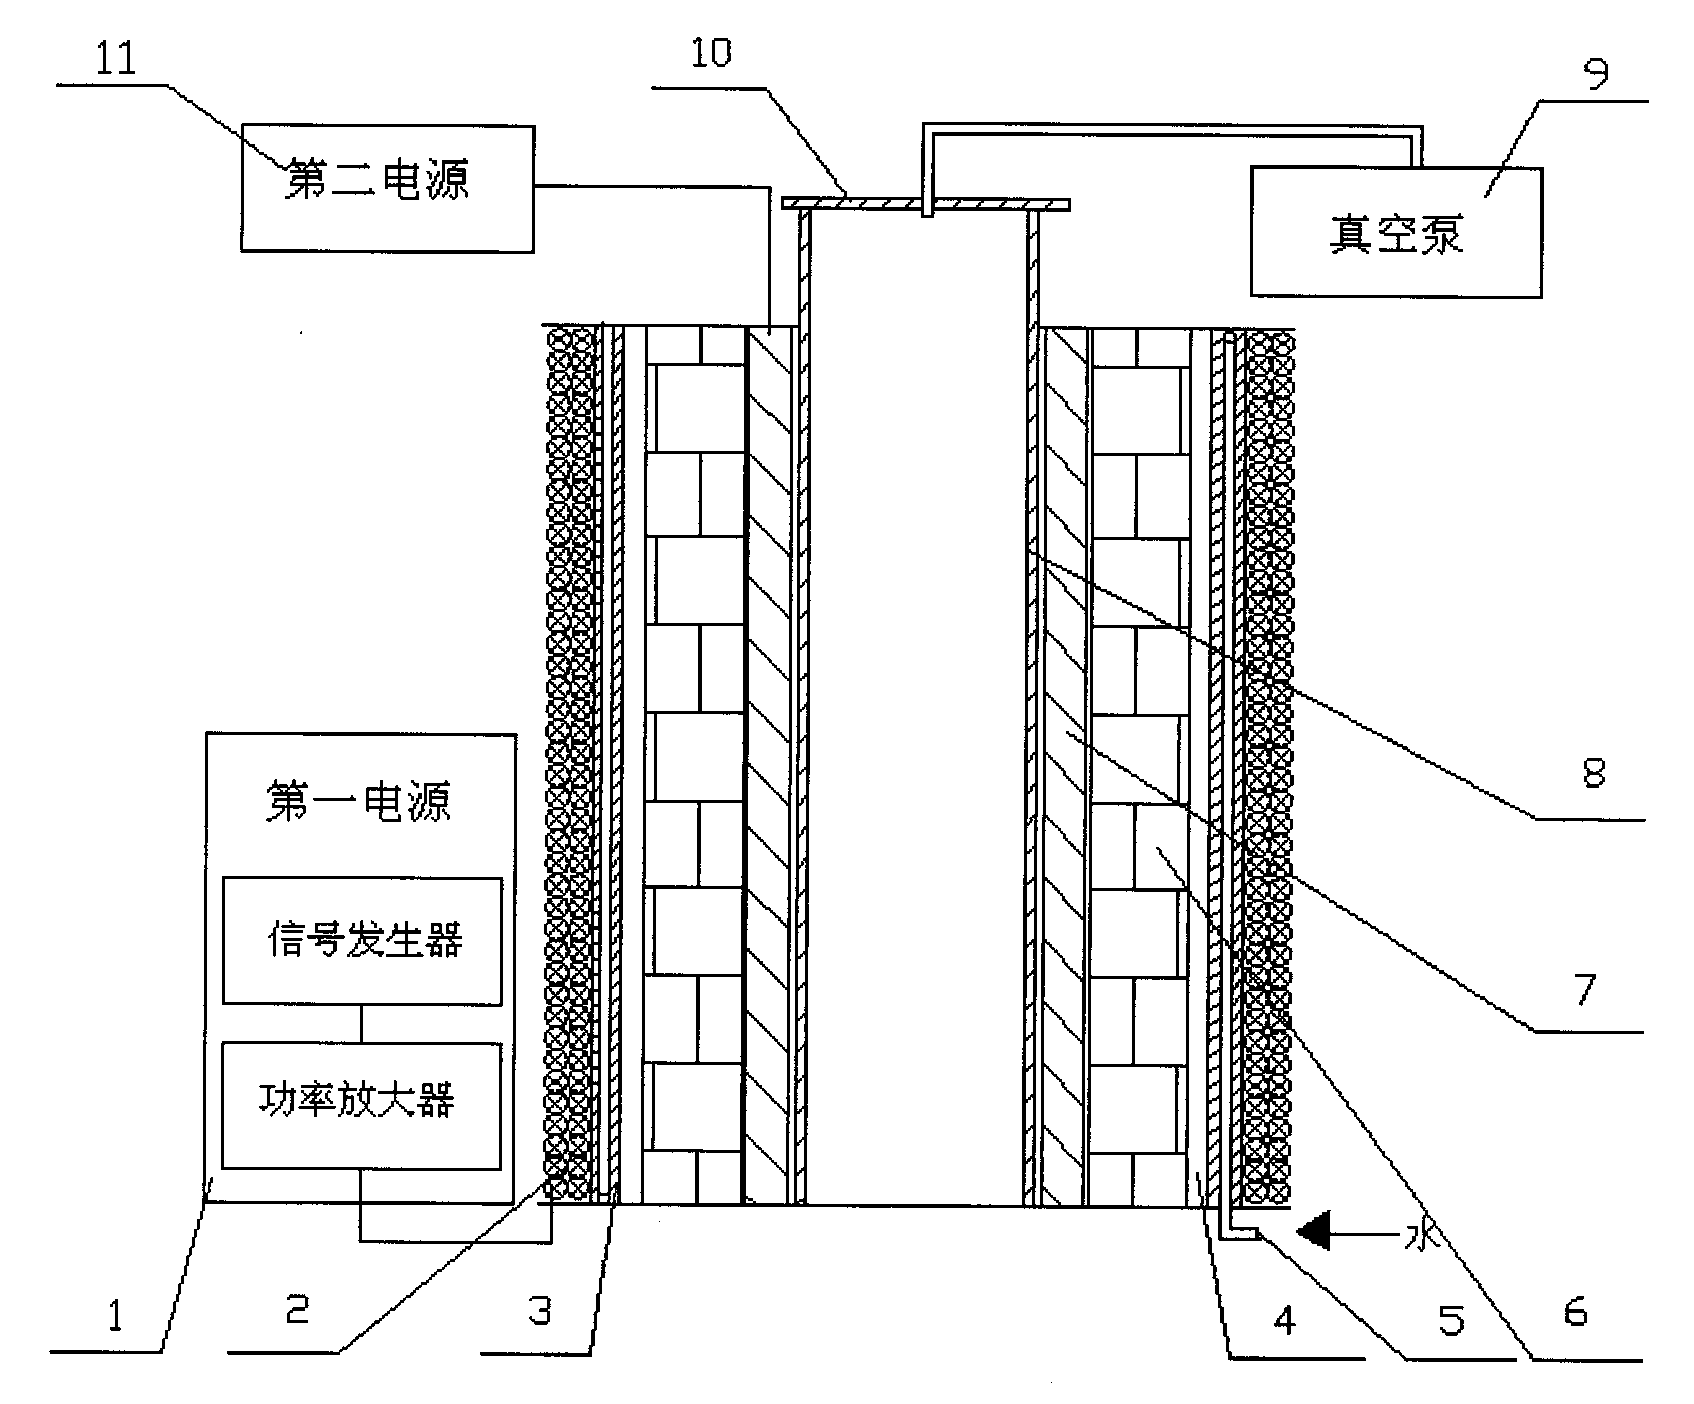 High-temperature atmosphere furnace with electromagnetic field